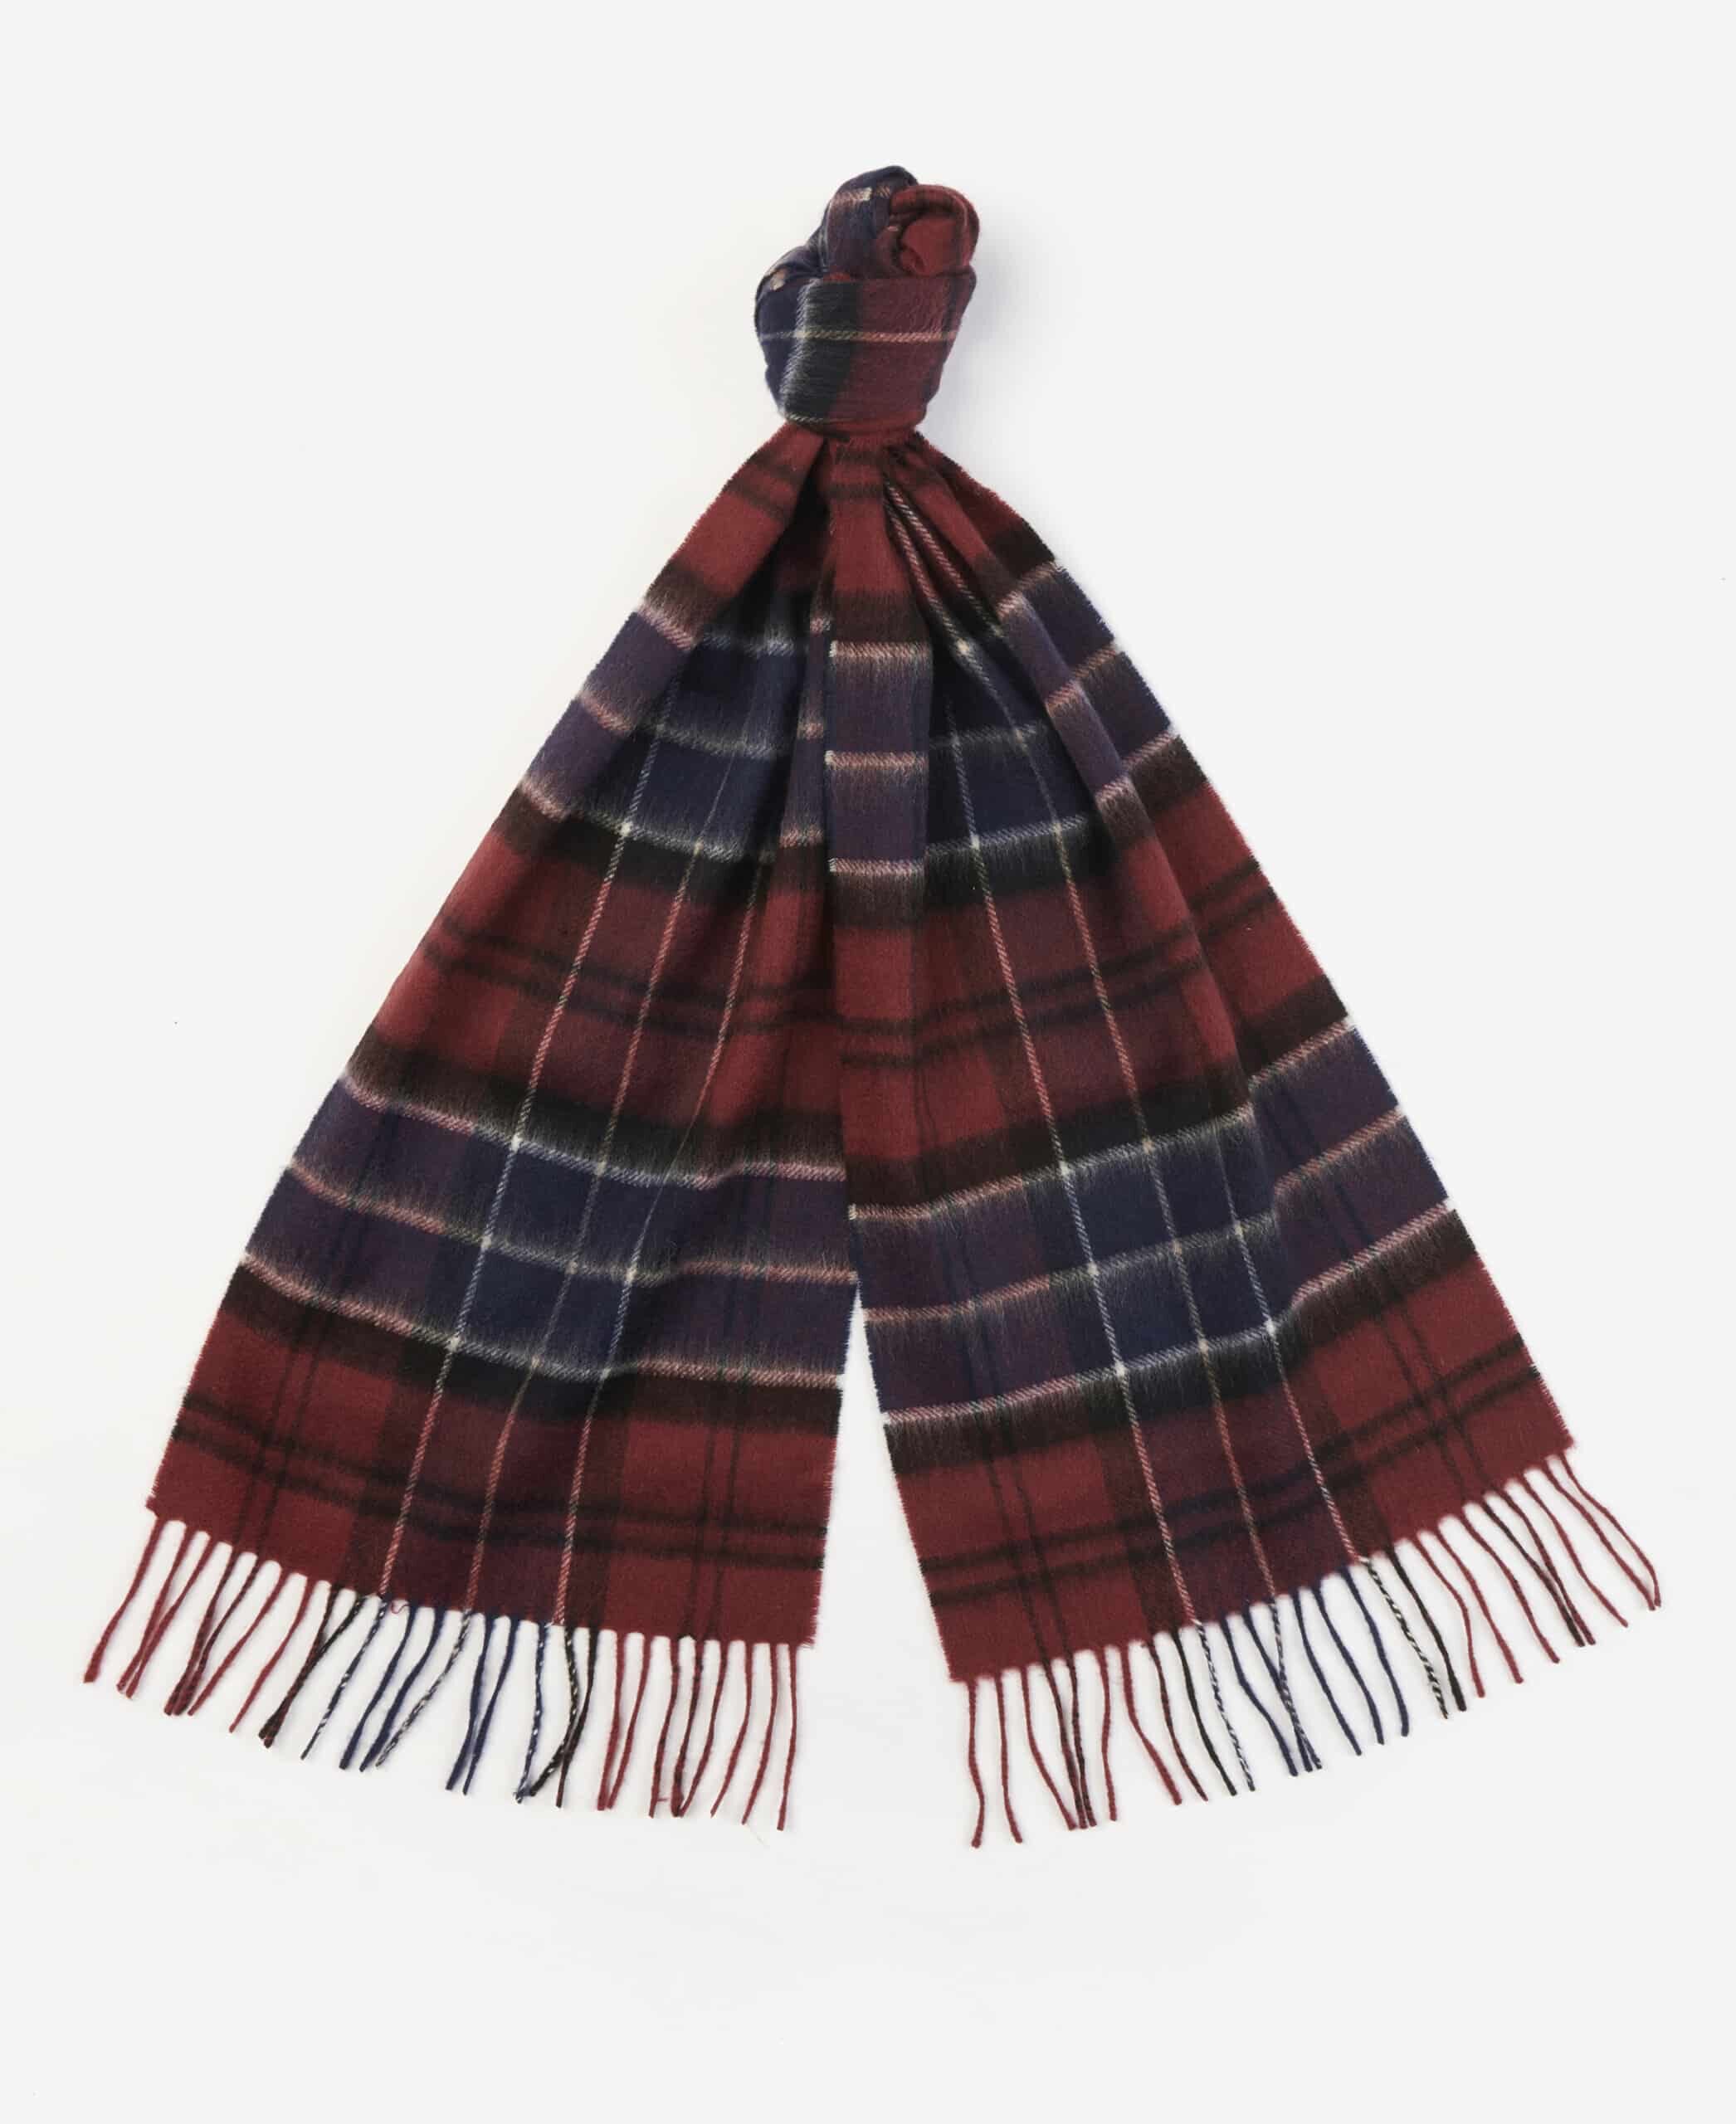 Lambswool and Cashmere Scarf – Cordovan Tartan